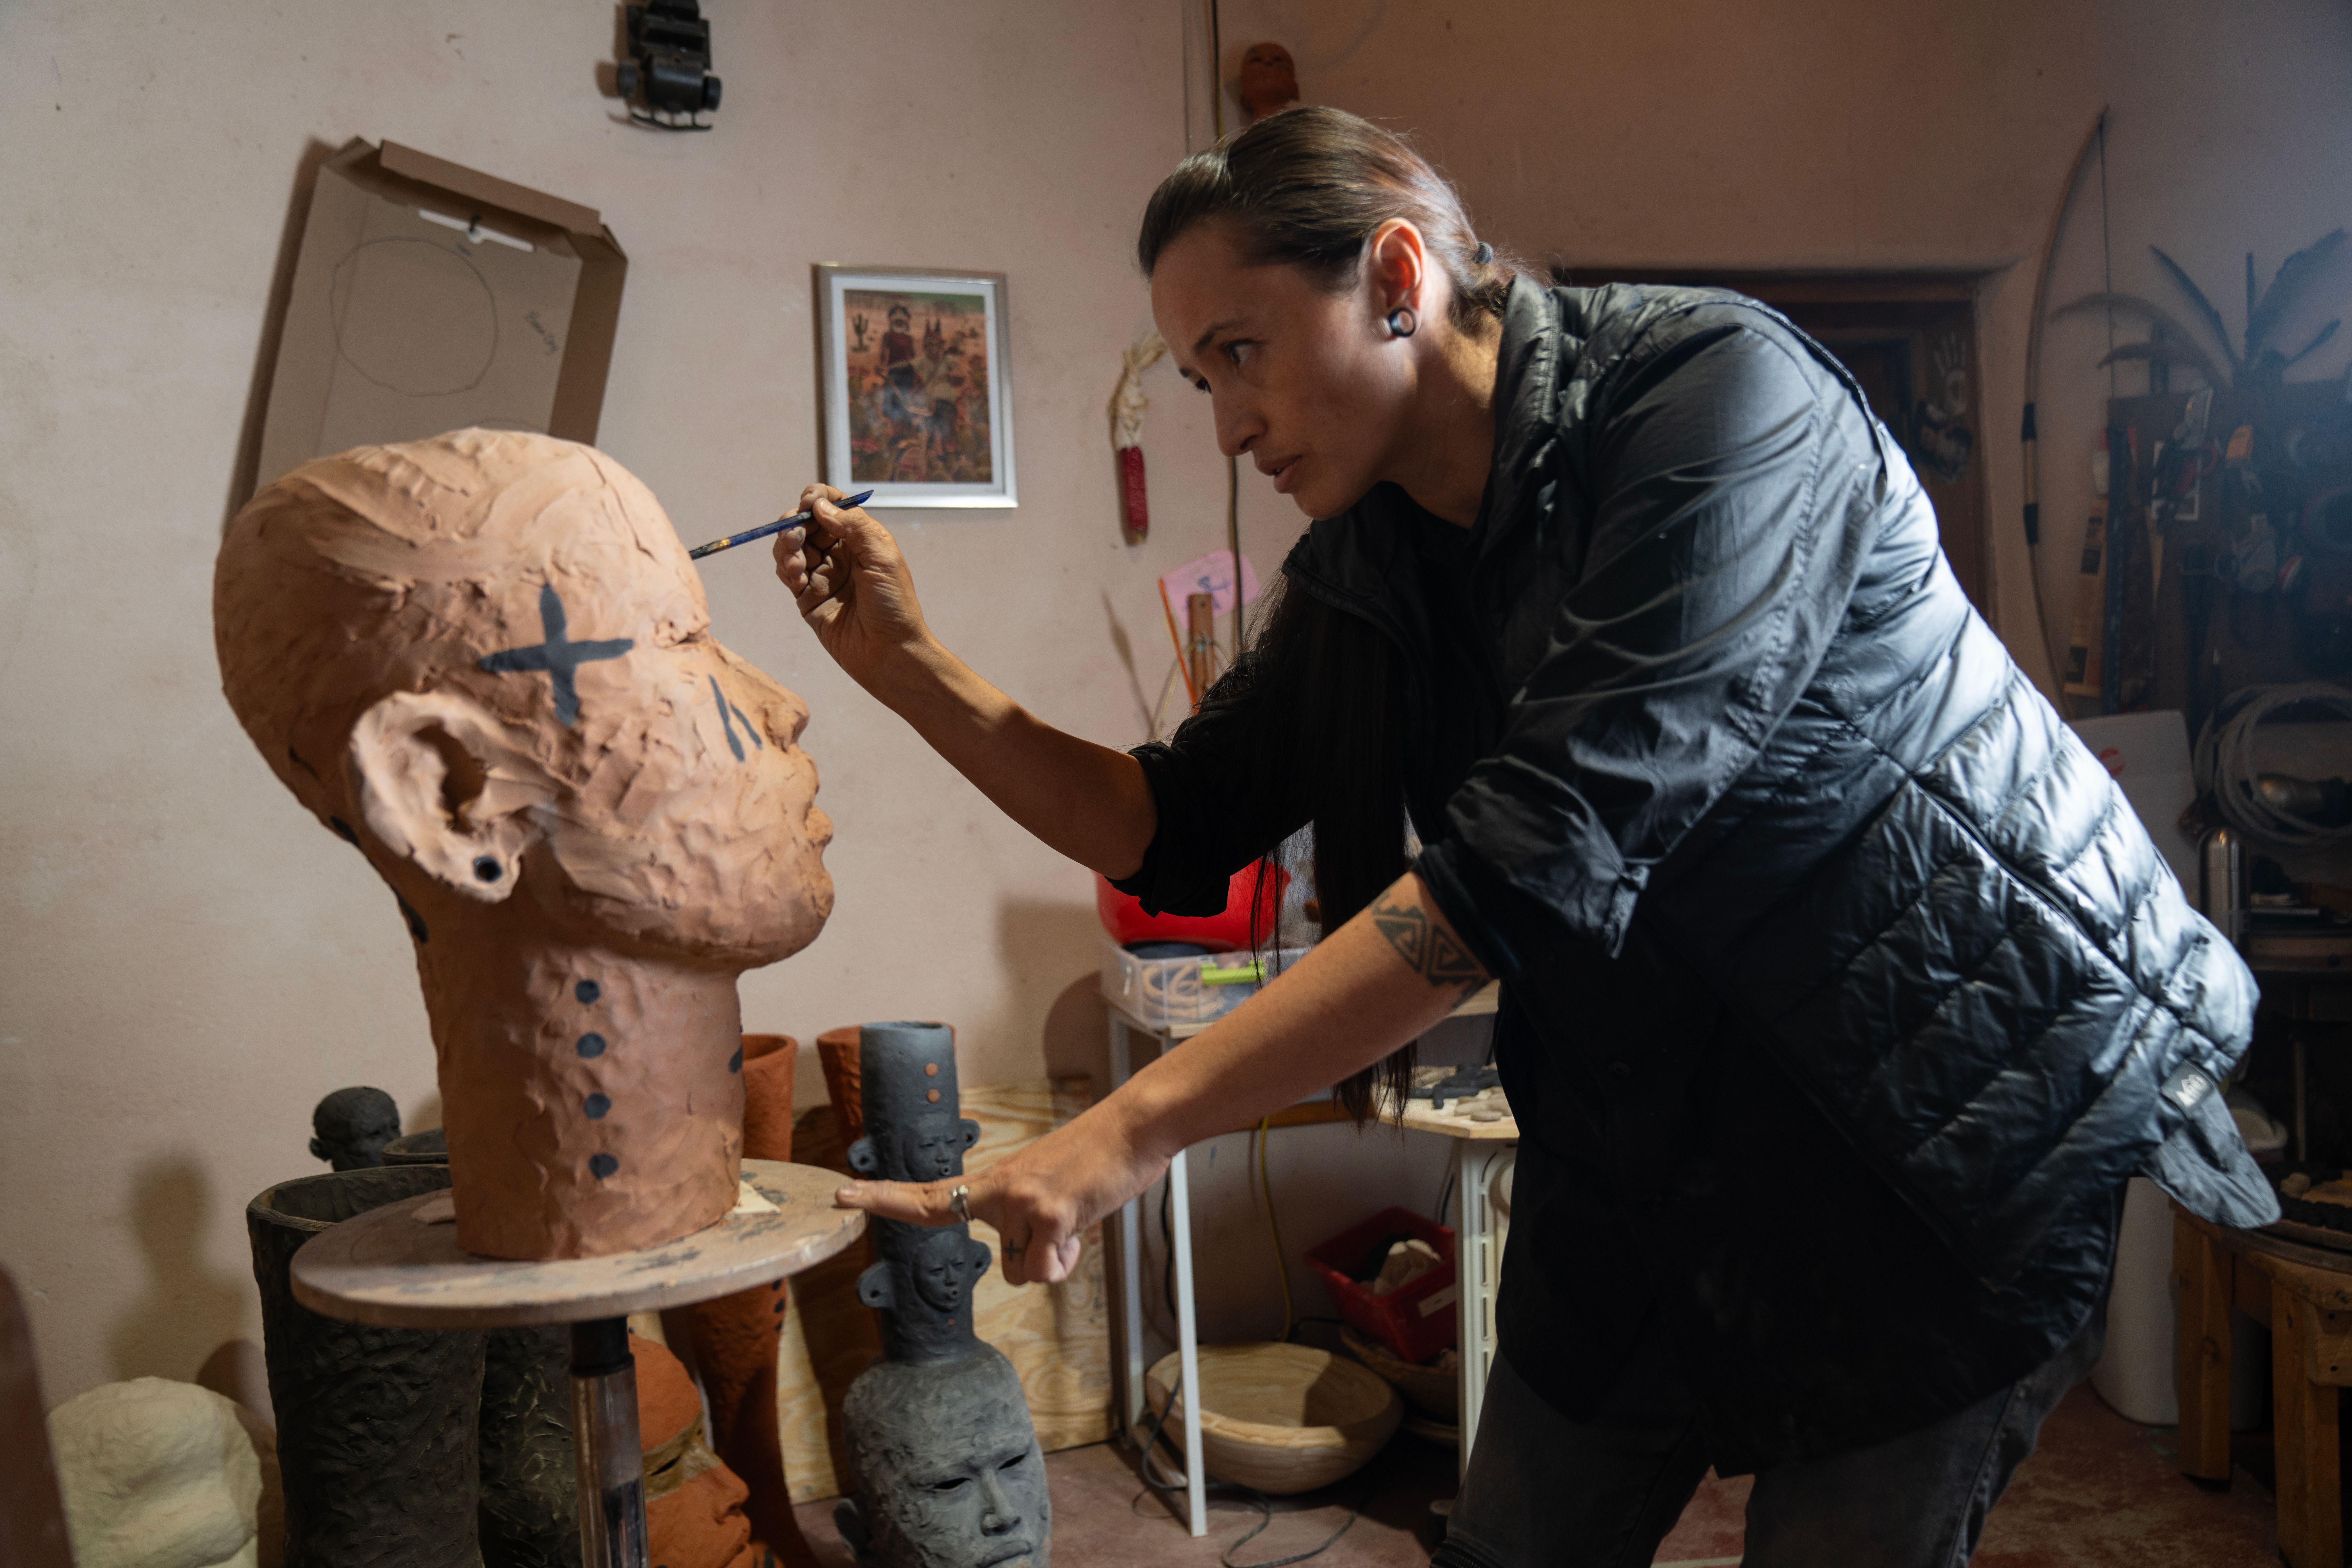 A wide shot of Rose painting the face of an extra large clay head